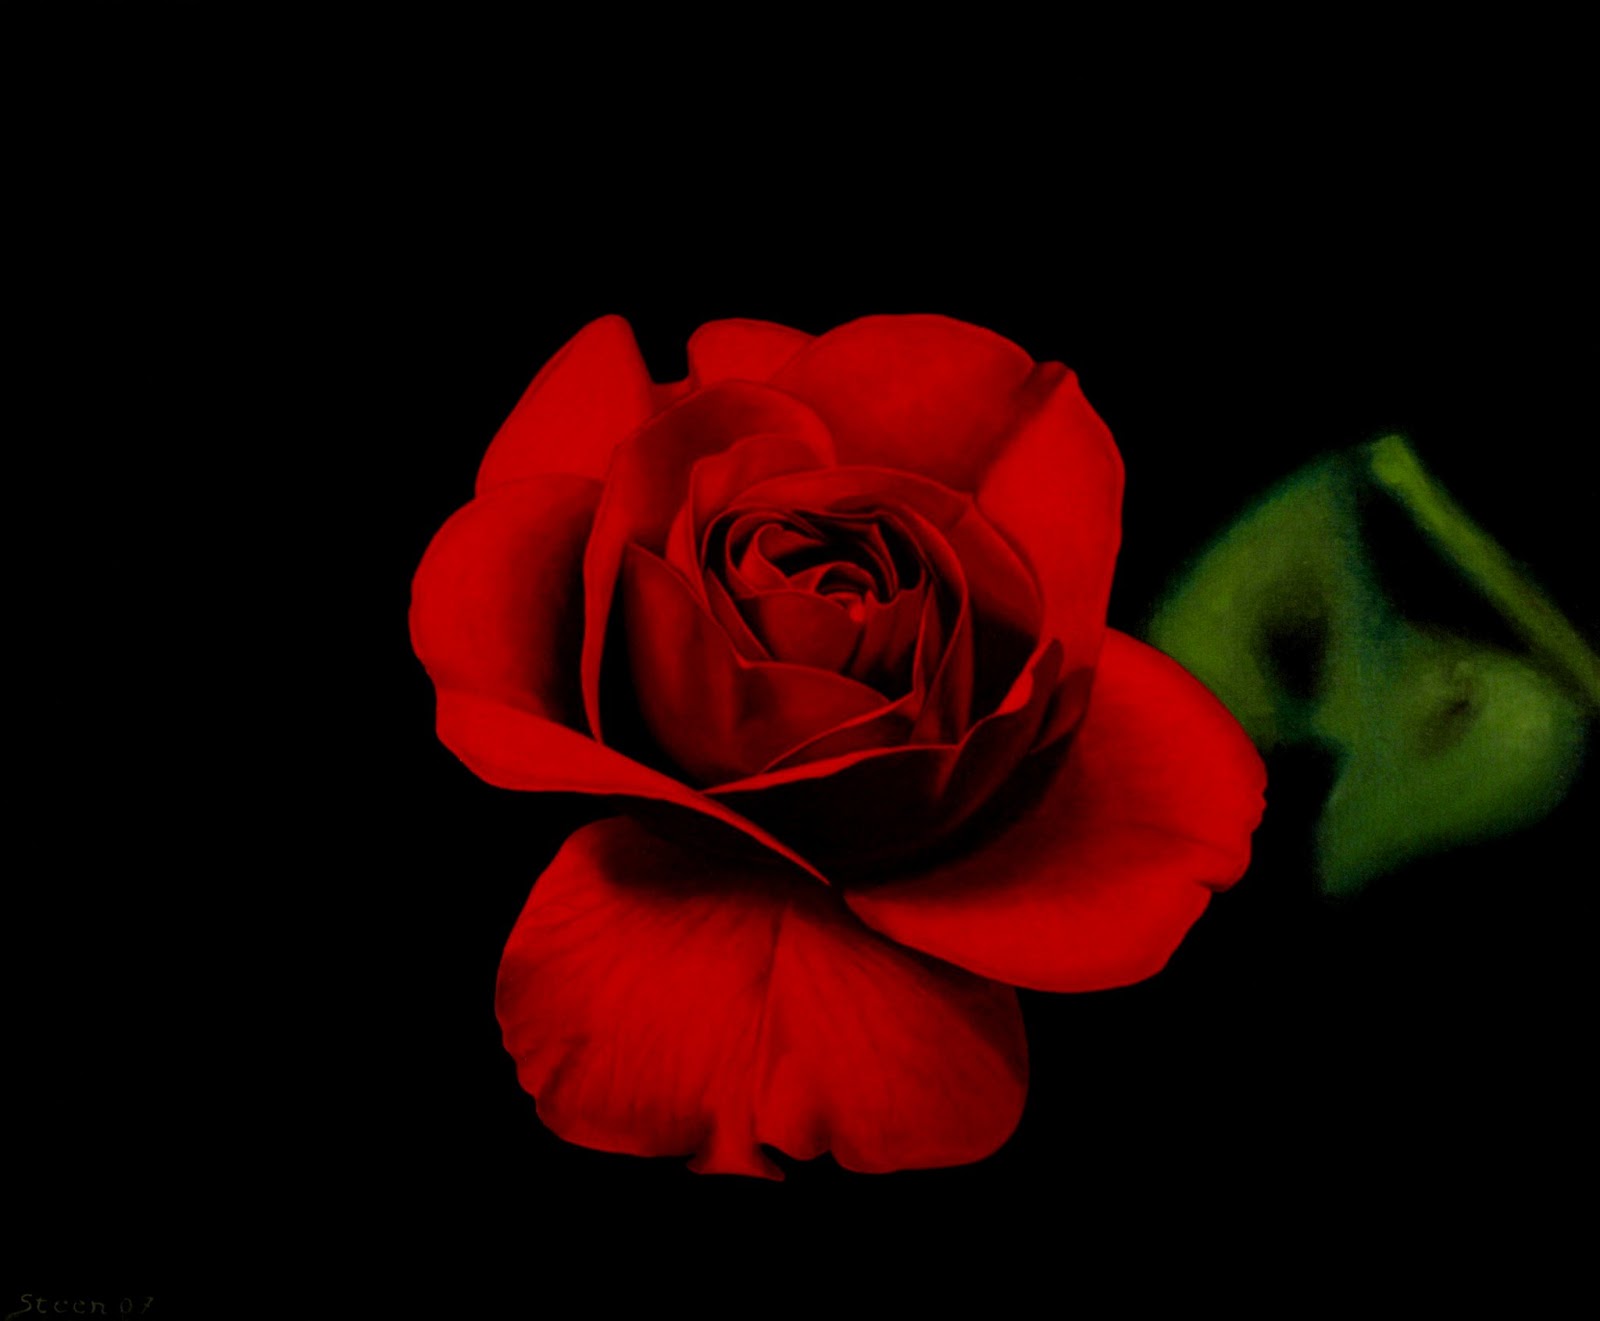 Red rose on black background oil painting on canvas 60x73cm 2007